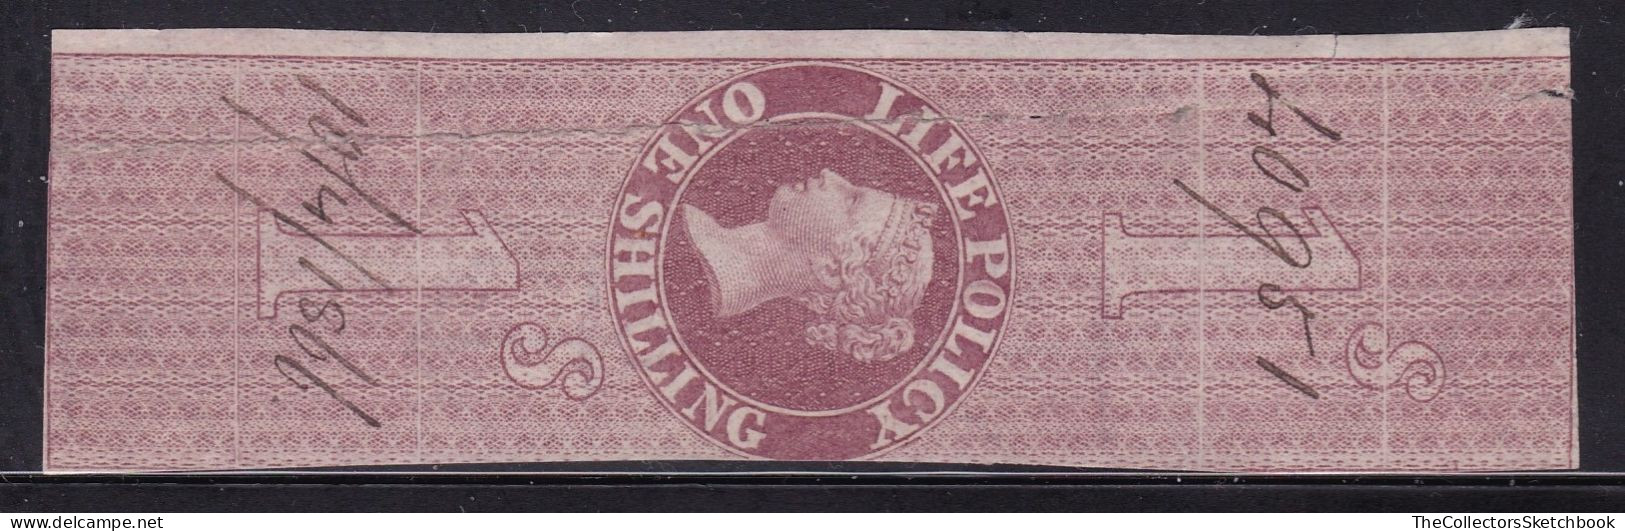 GB Fiscals / Revenues Life Policy 1/ -  Red - Brown Barefoot 29 , Poor Condition - Revenue Stamps